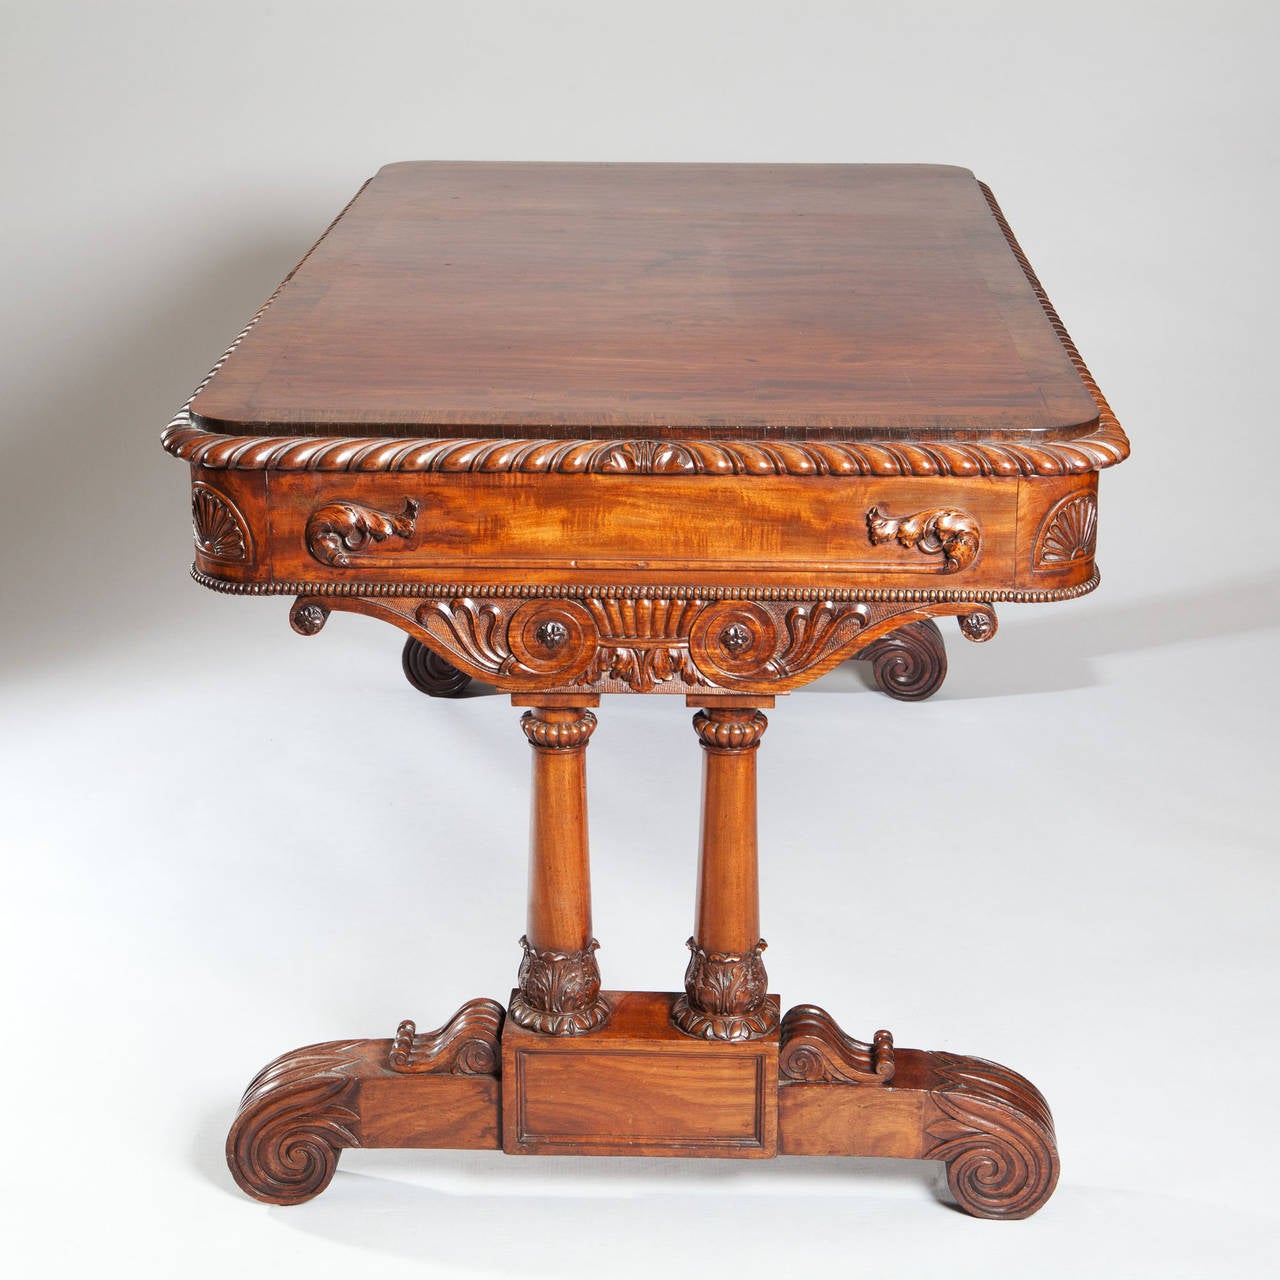 Irish Regency Writing Desk by Mack, Williams & Gibton 19th Century Mahogany In Excellent Condition In London, by appointment only